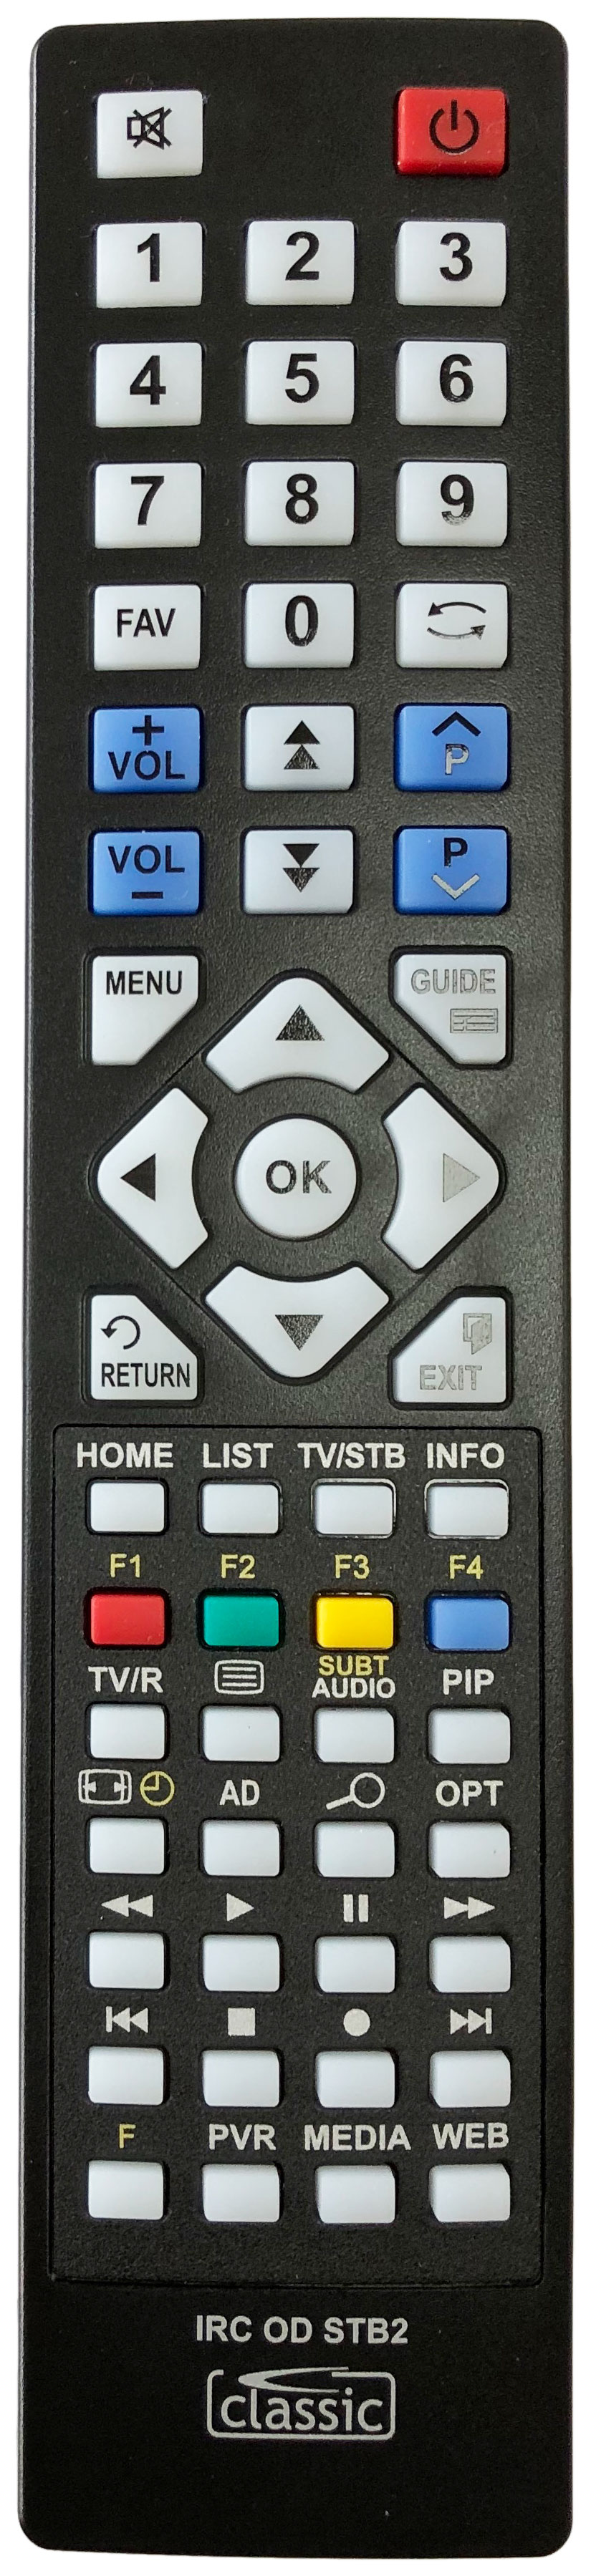 PHILIPS HDT 8520/05 Remote Control